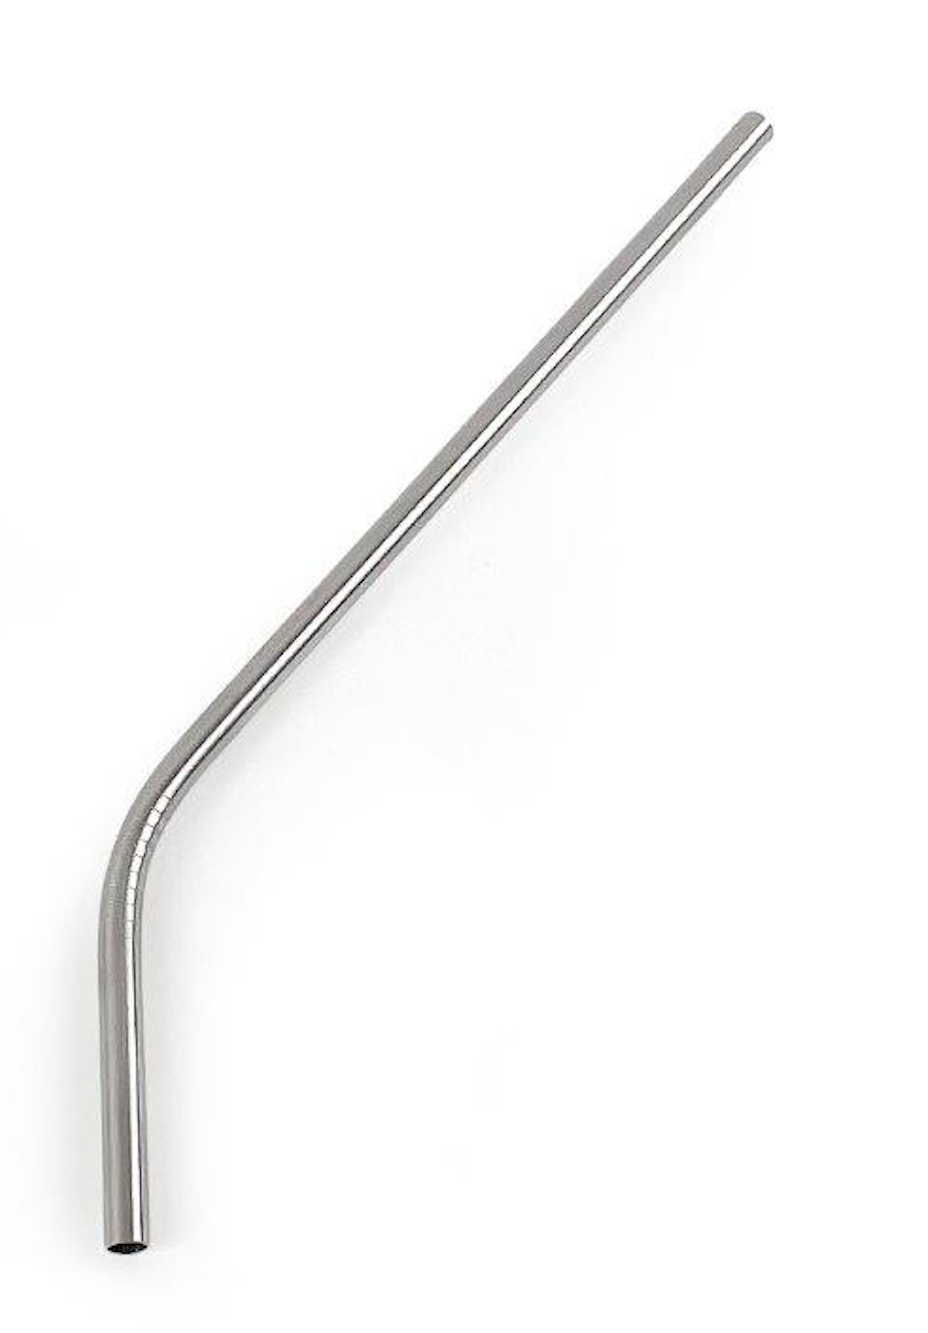 Stainless Steel Curved Straws 